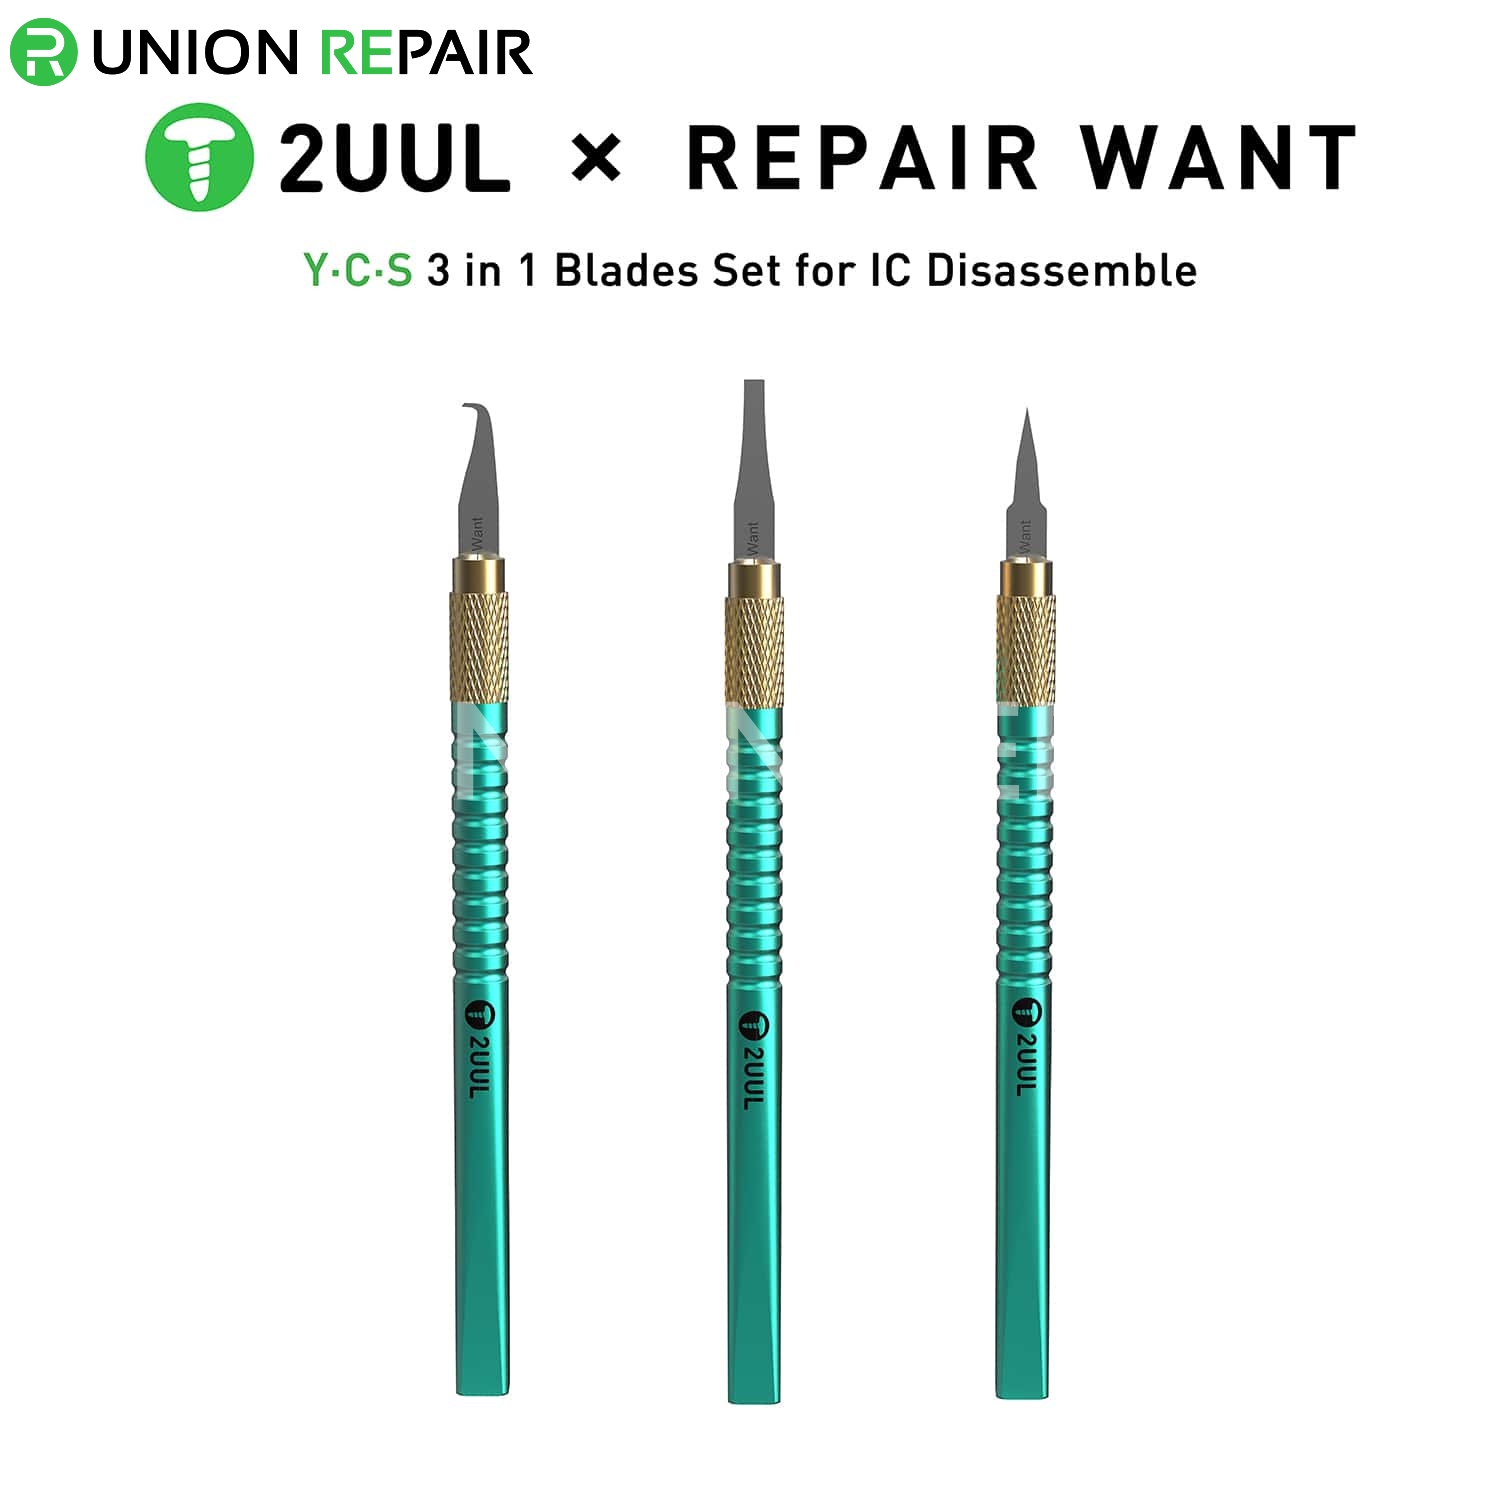 2UUL x Repair Want Y-C-S 3 in 1 Blades Set for IC Disassemble